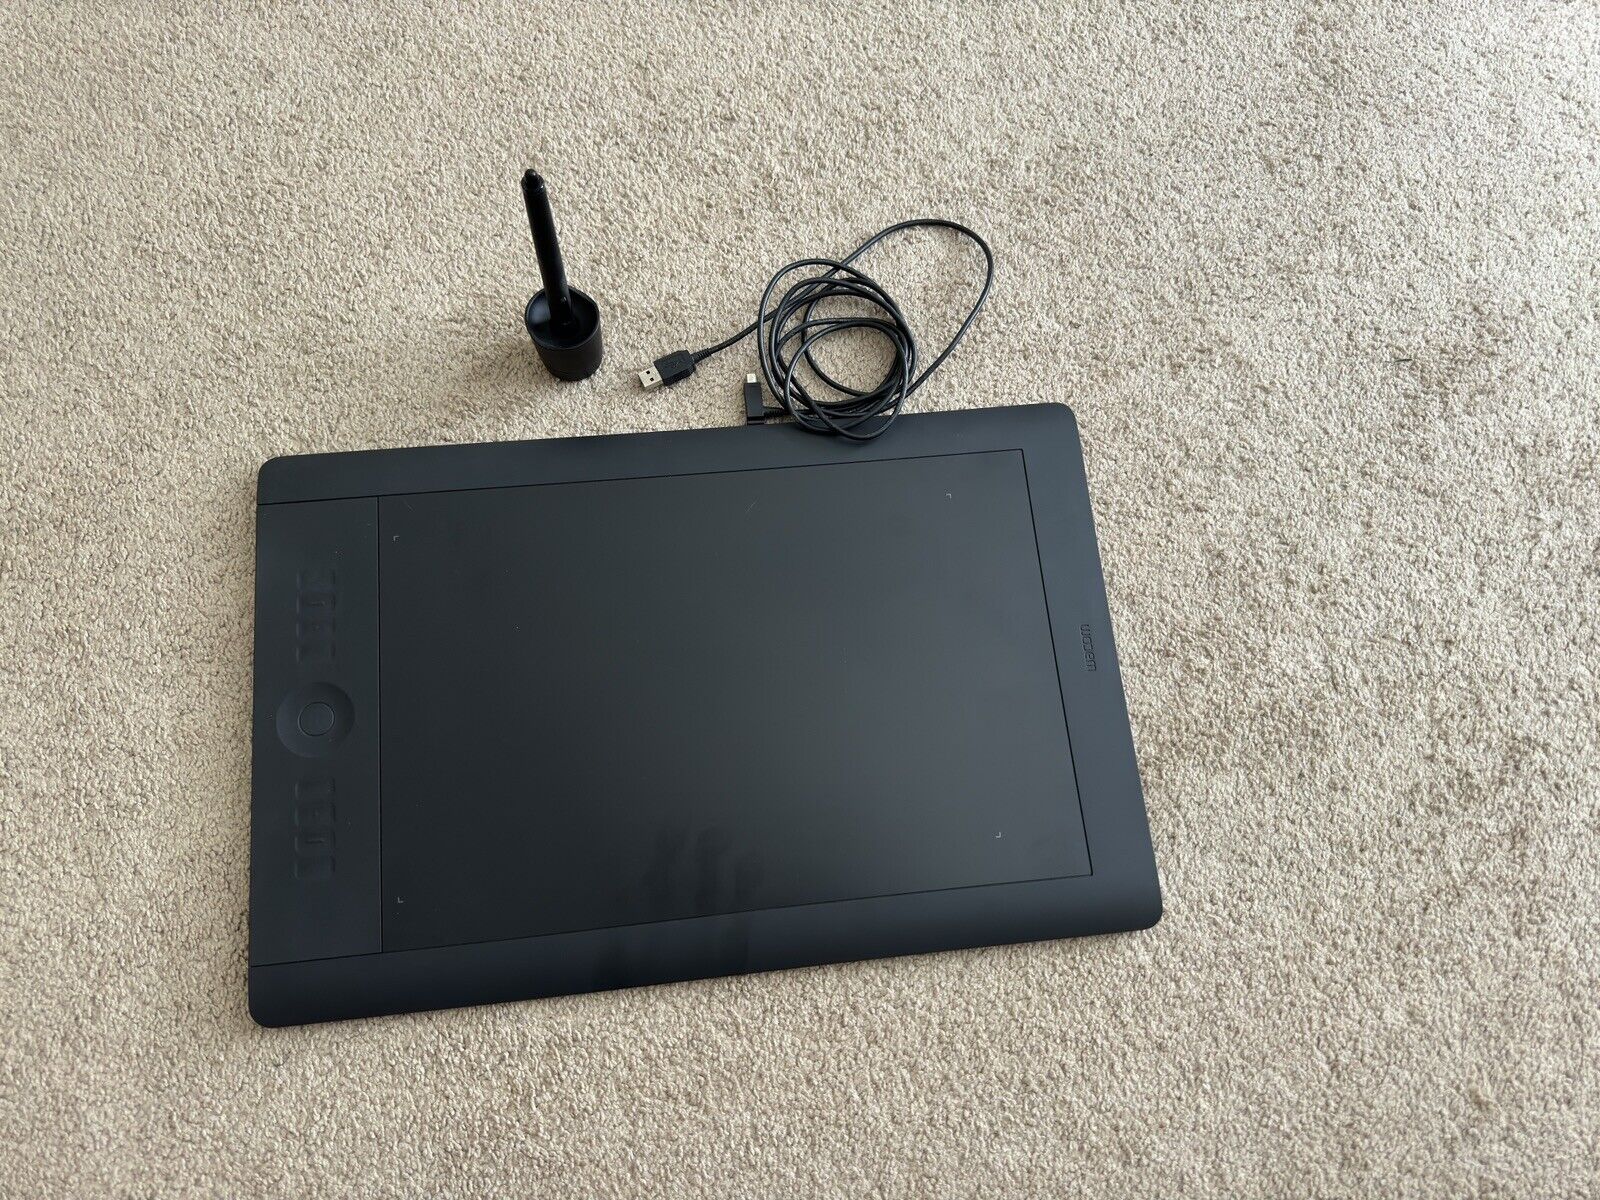 Wacom PTH850 Intuos 5 Pro Large Graphic Tablet with Pen